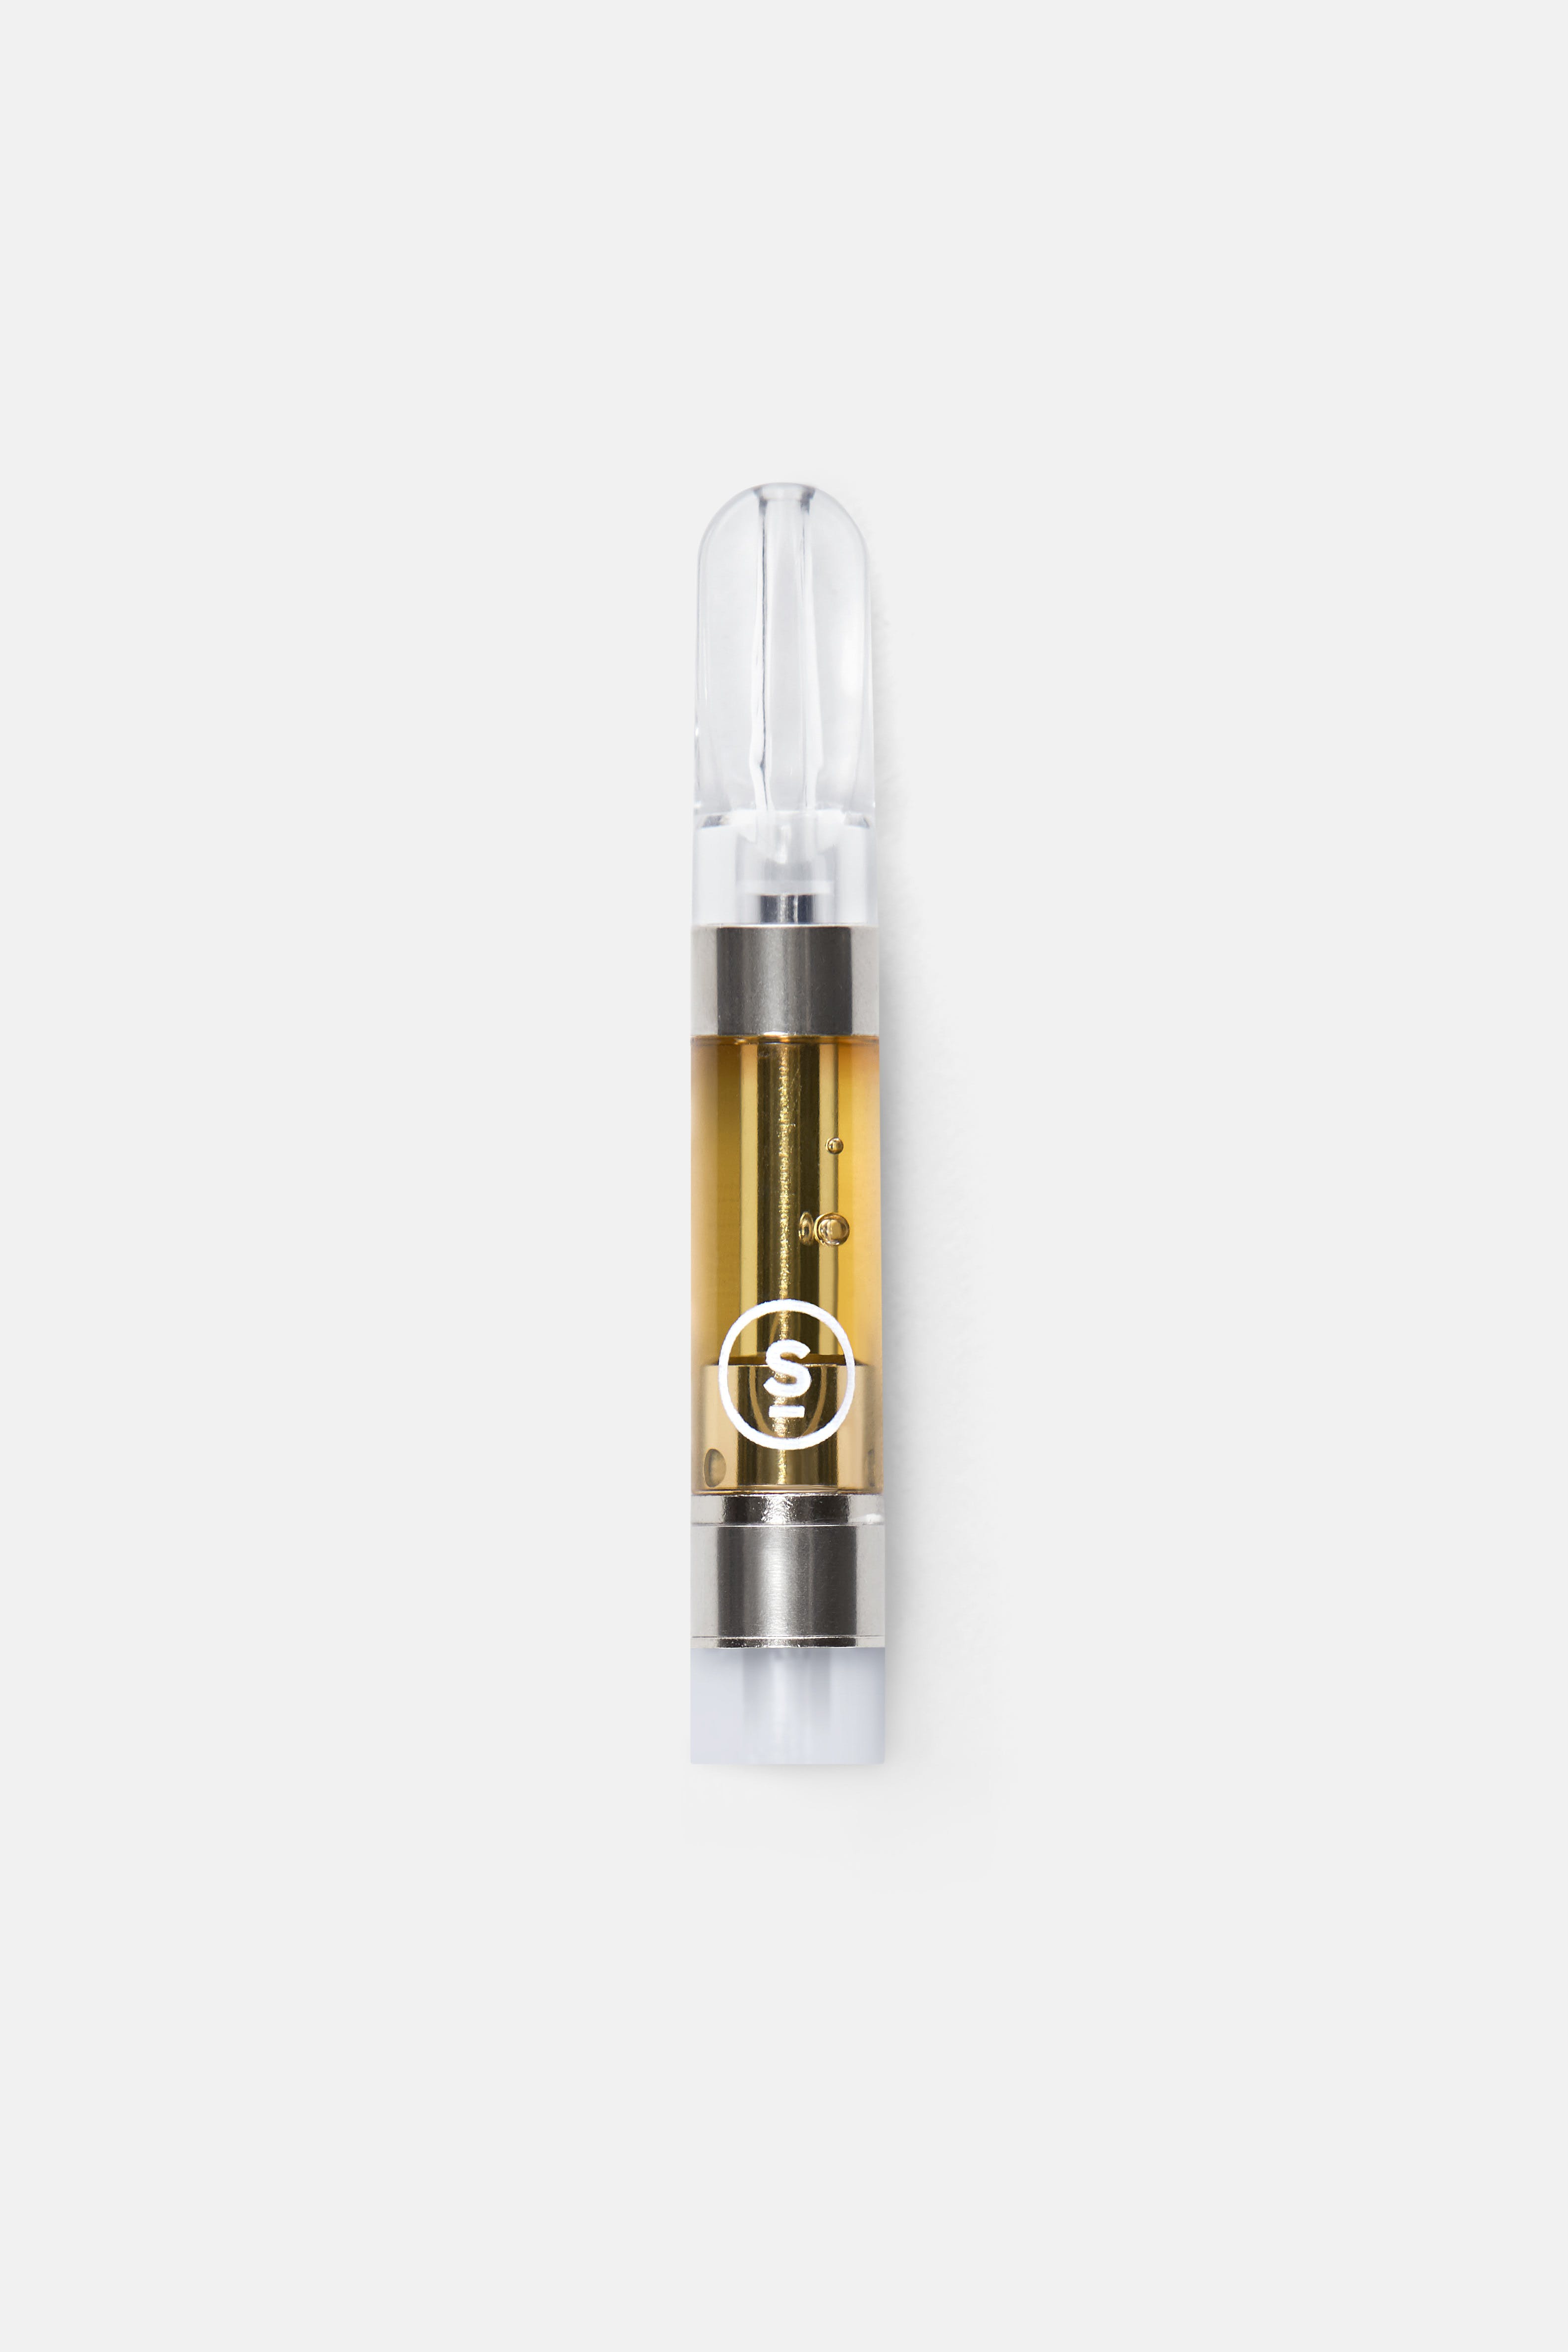 concentrate-gelato-2333-select-vapes-500mg